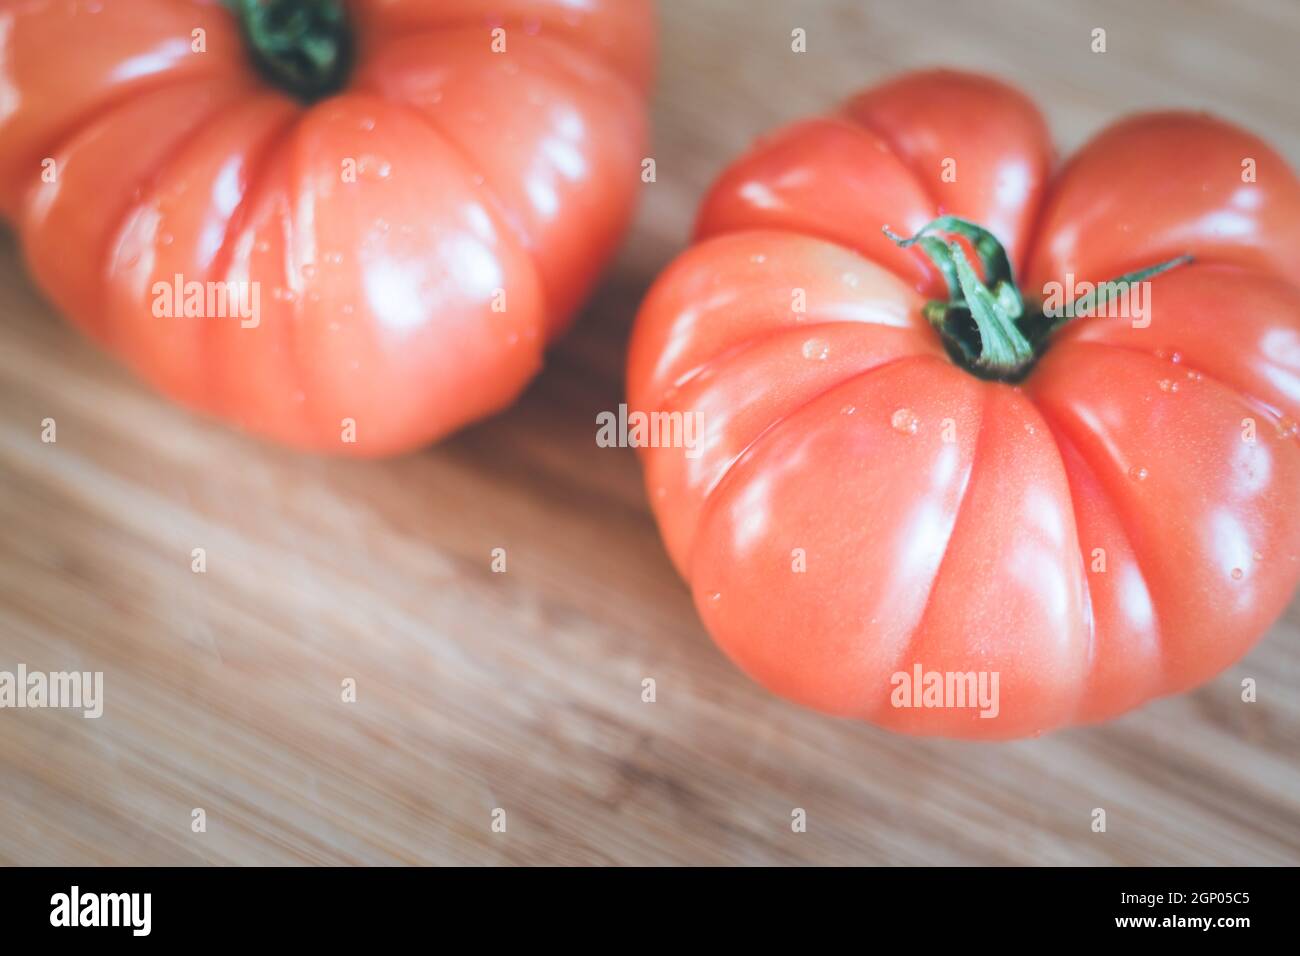 Close up picture of oxheart tomatoes on a bamboo wood plate. Stock Photo